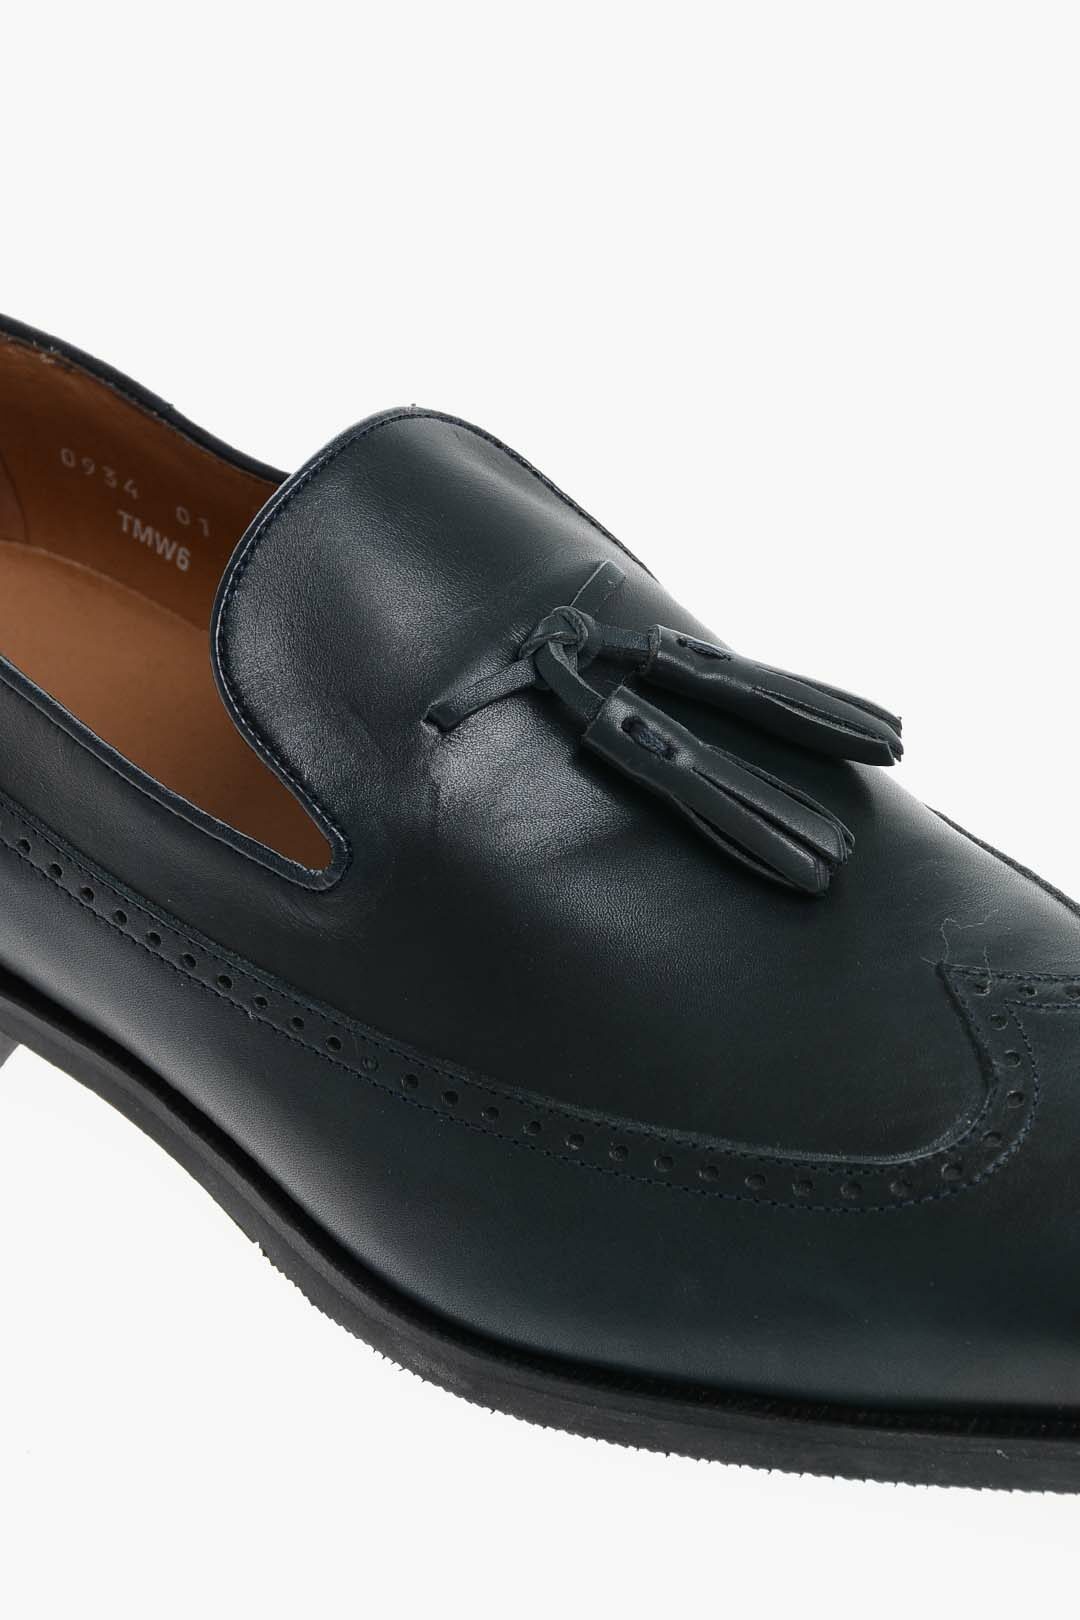 Corneliani Leather Tassel Loafers with Brogue Detail men - Glamood Outlet